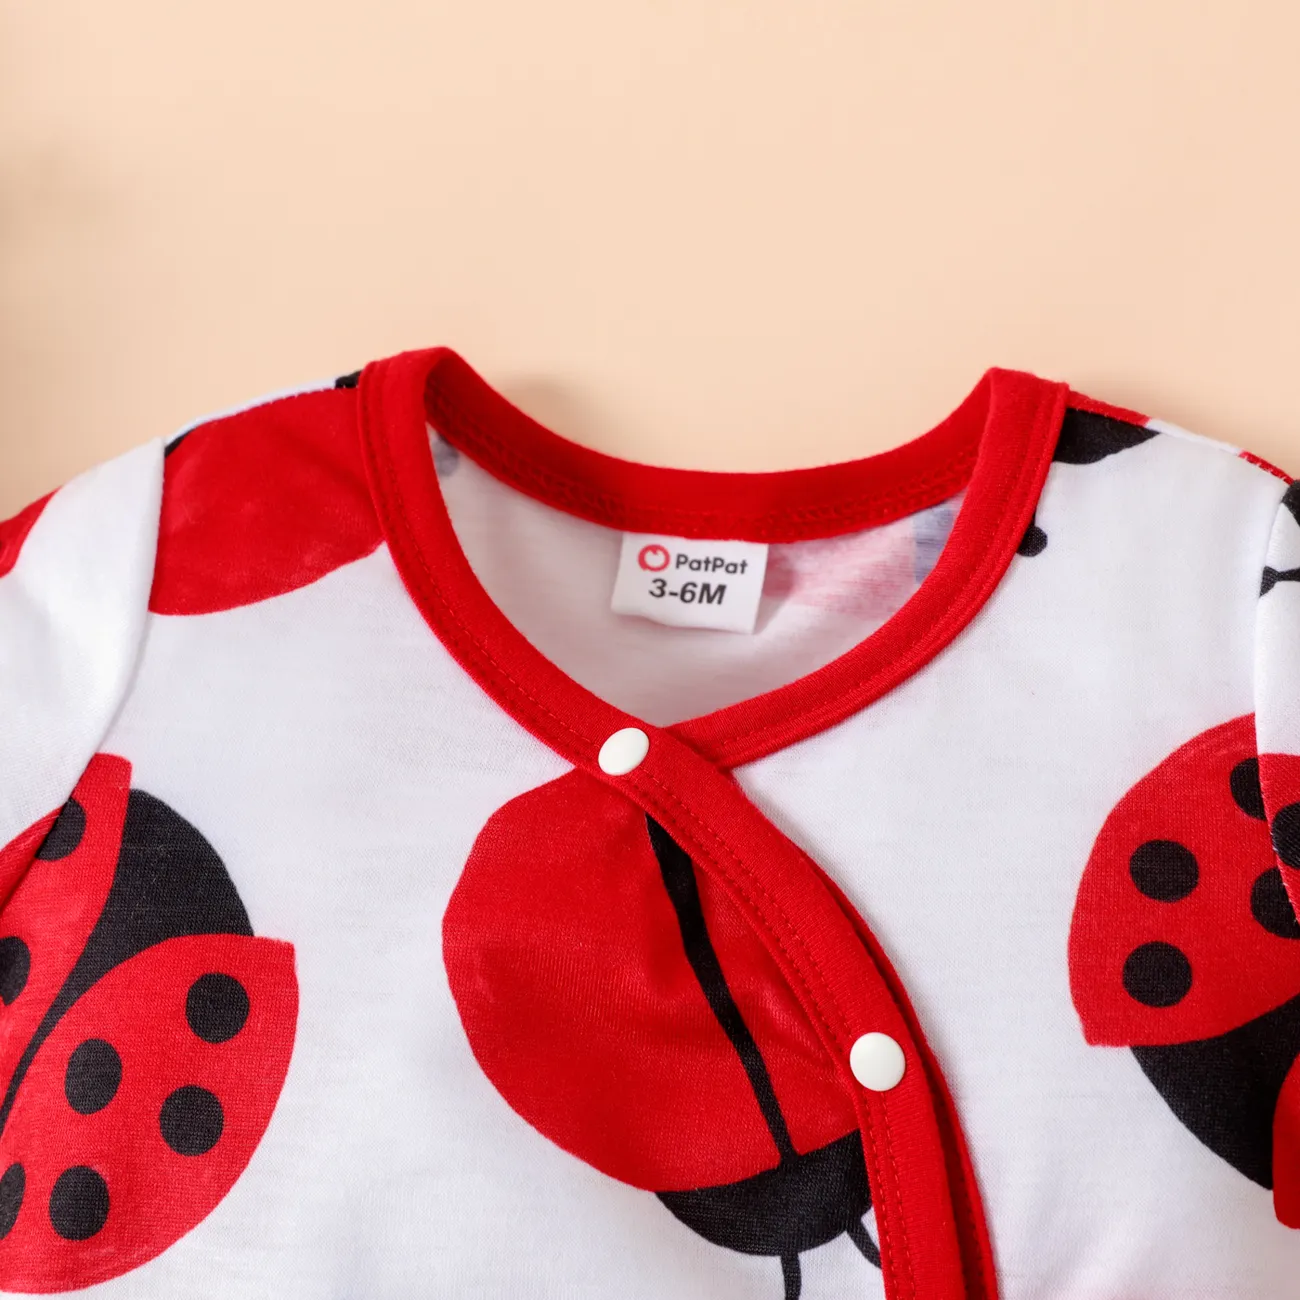 Naia™ Baby Girl Allover Bee/Ladybird Print Short-sleeve Jumpsuit Red-2 big image 1